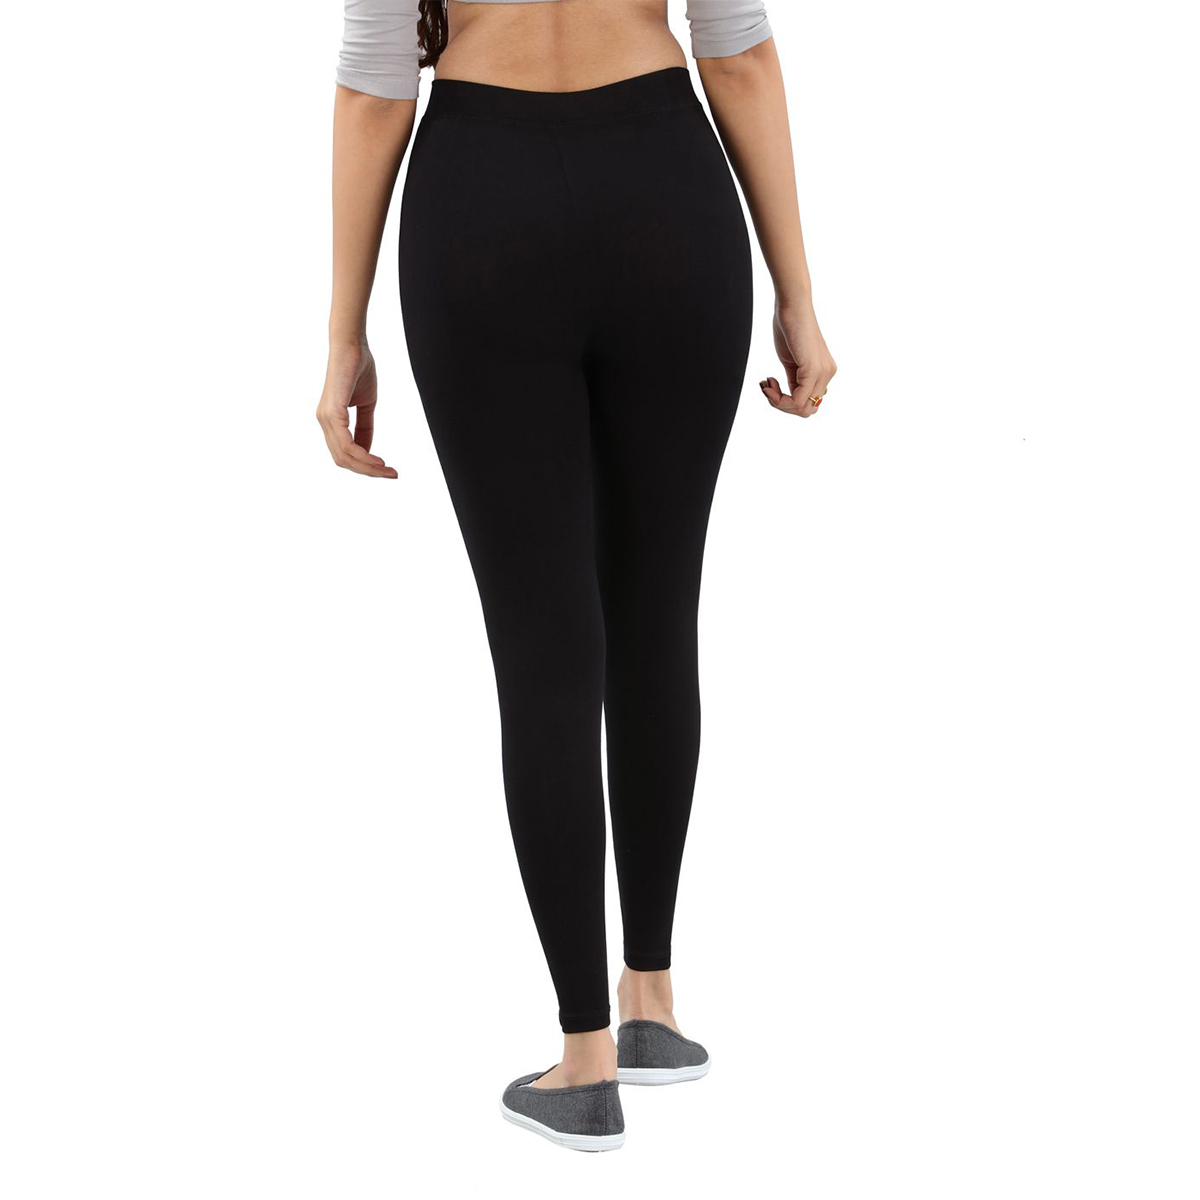 Twin Birds Women Solid Colour Viscose Ankle Length Legging with Signature Wide Waistband - Black Plus